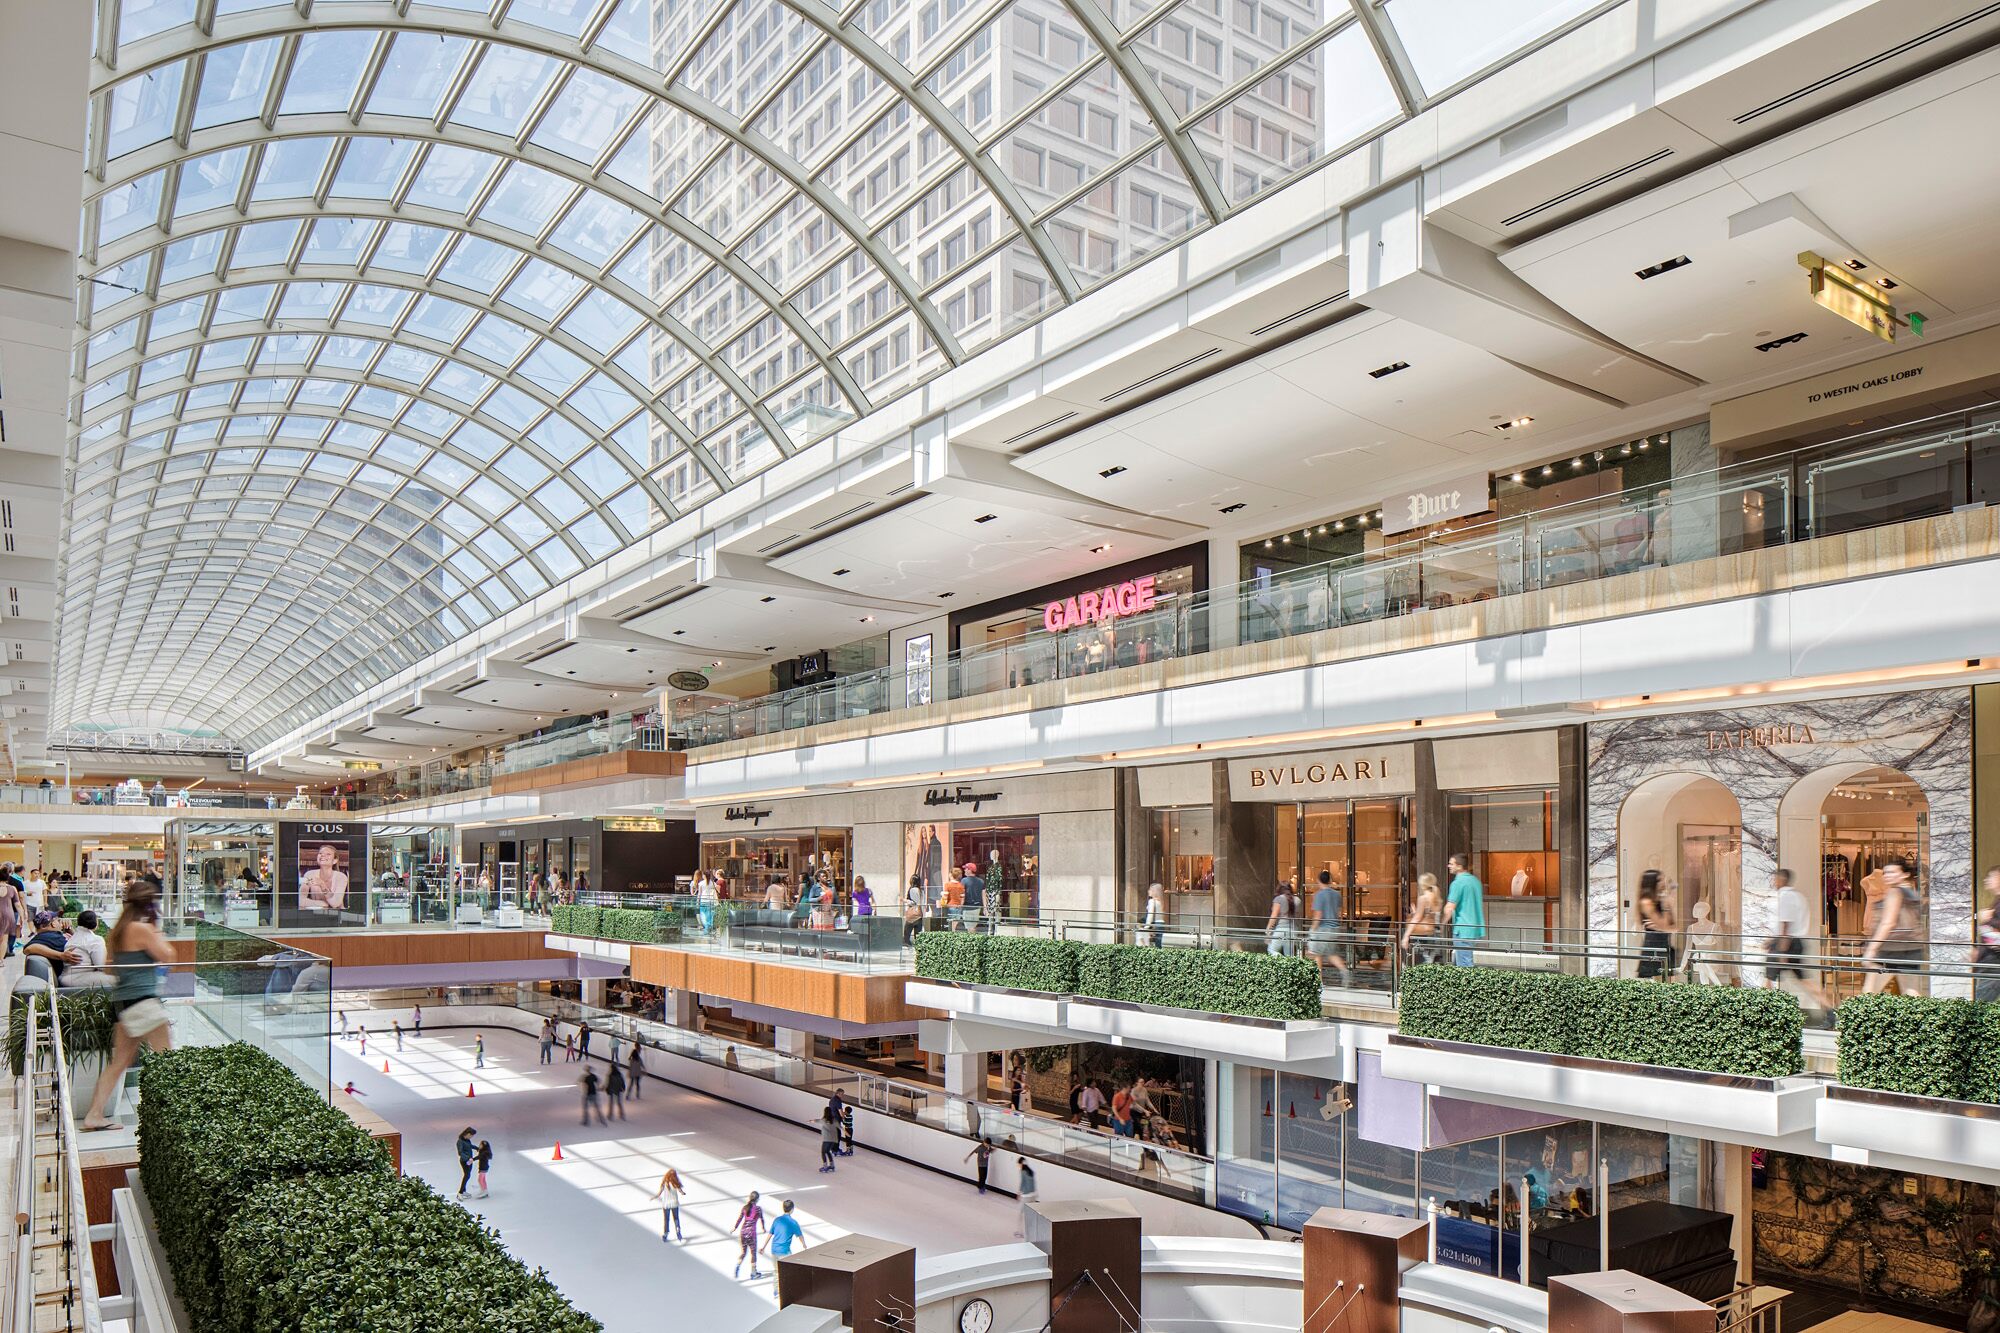 About Copley Place - A Shopping Center in Boston, MA - A Simon Property